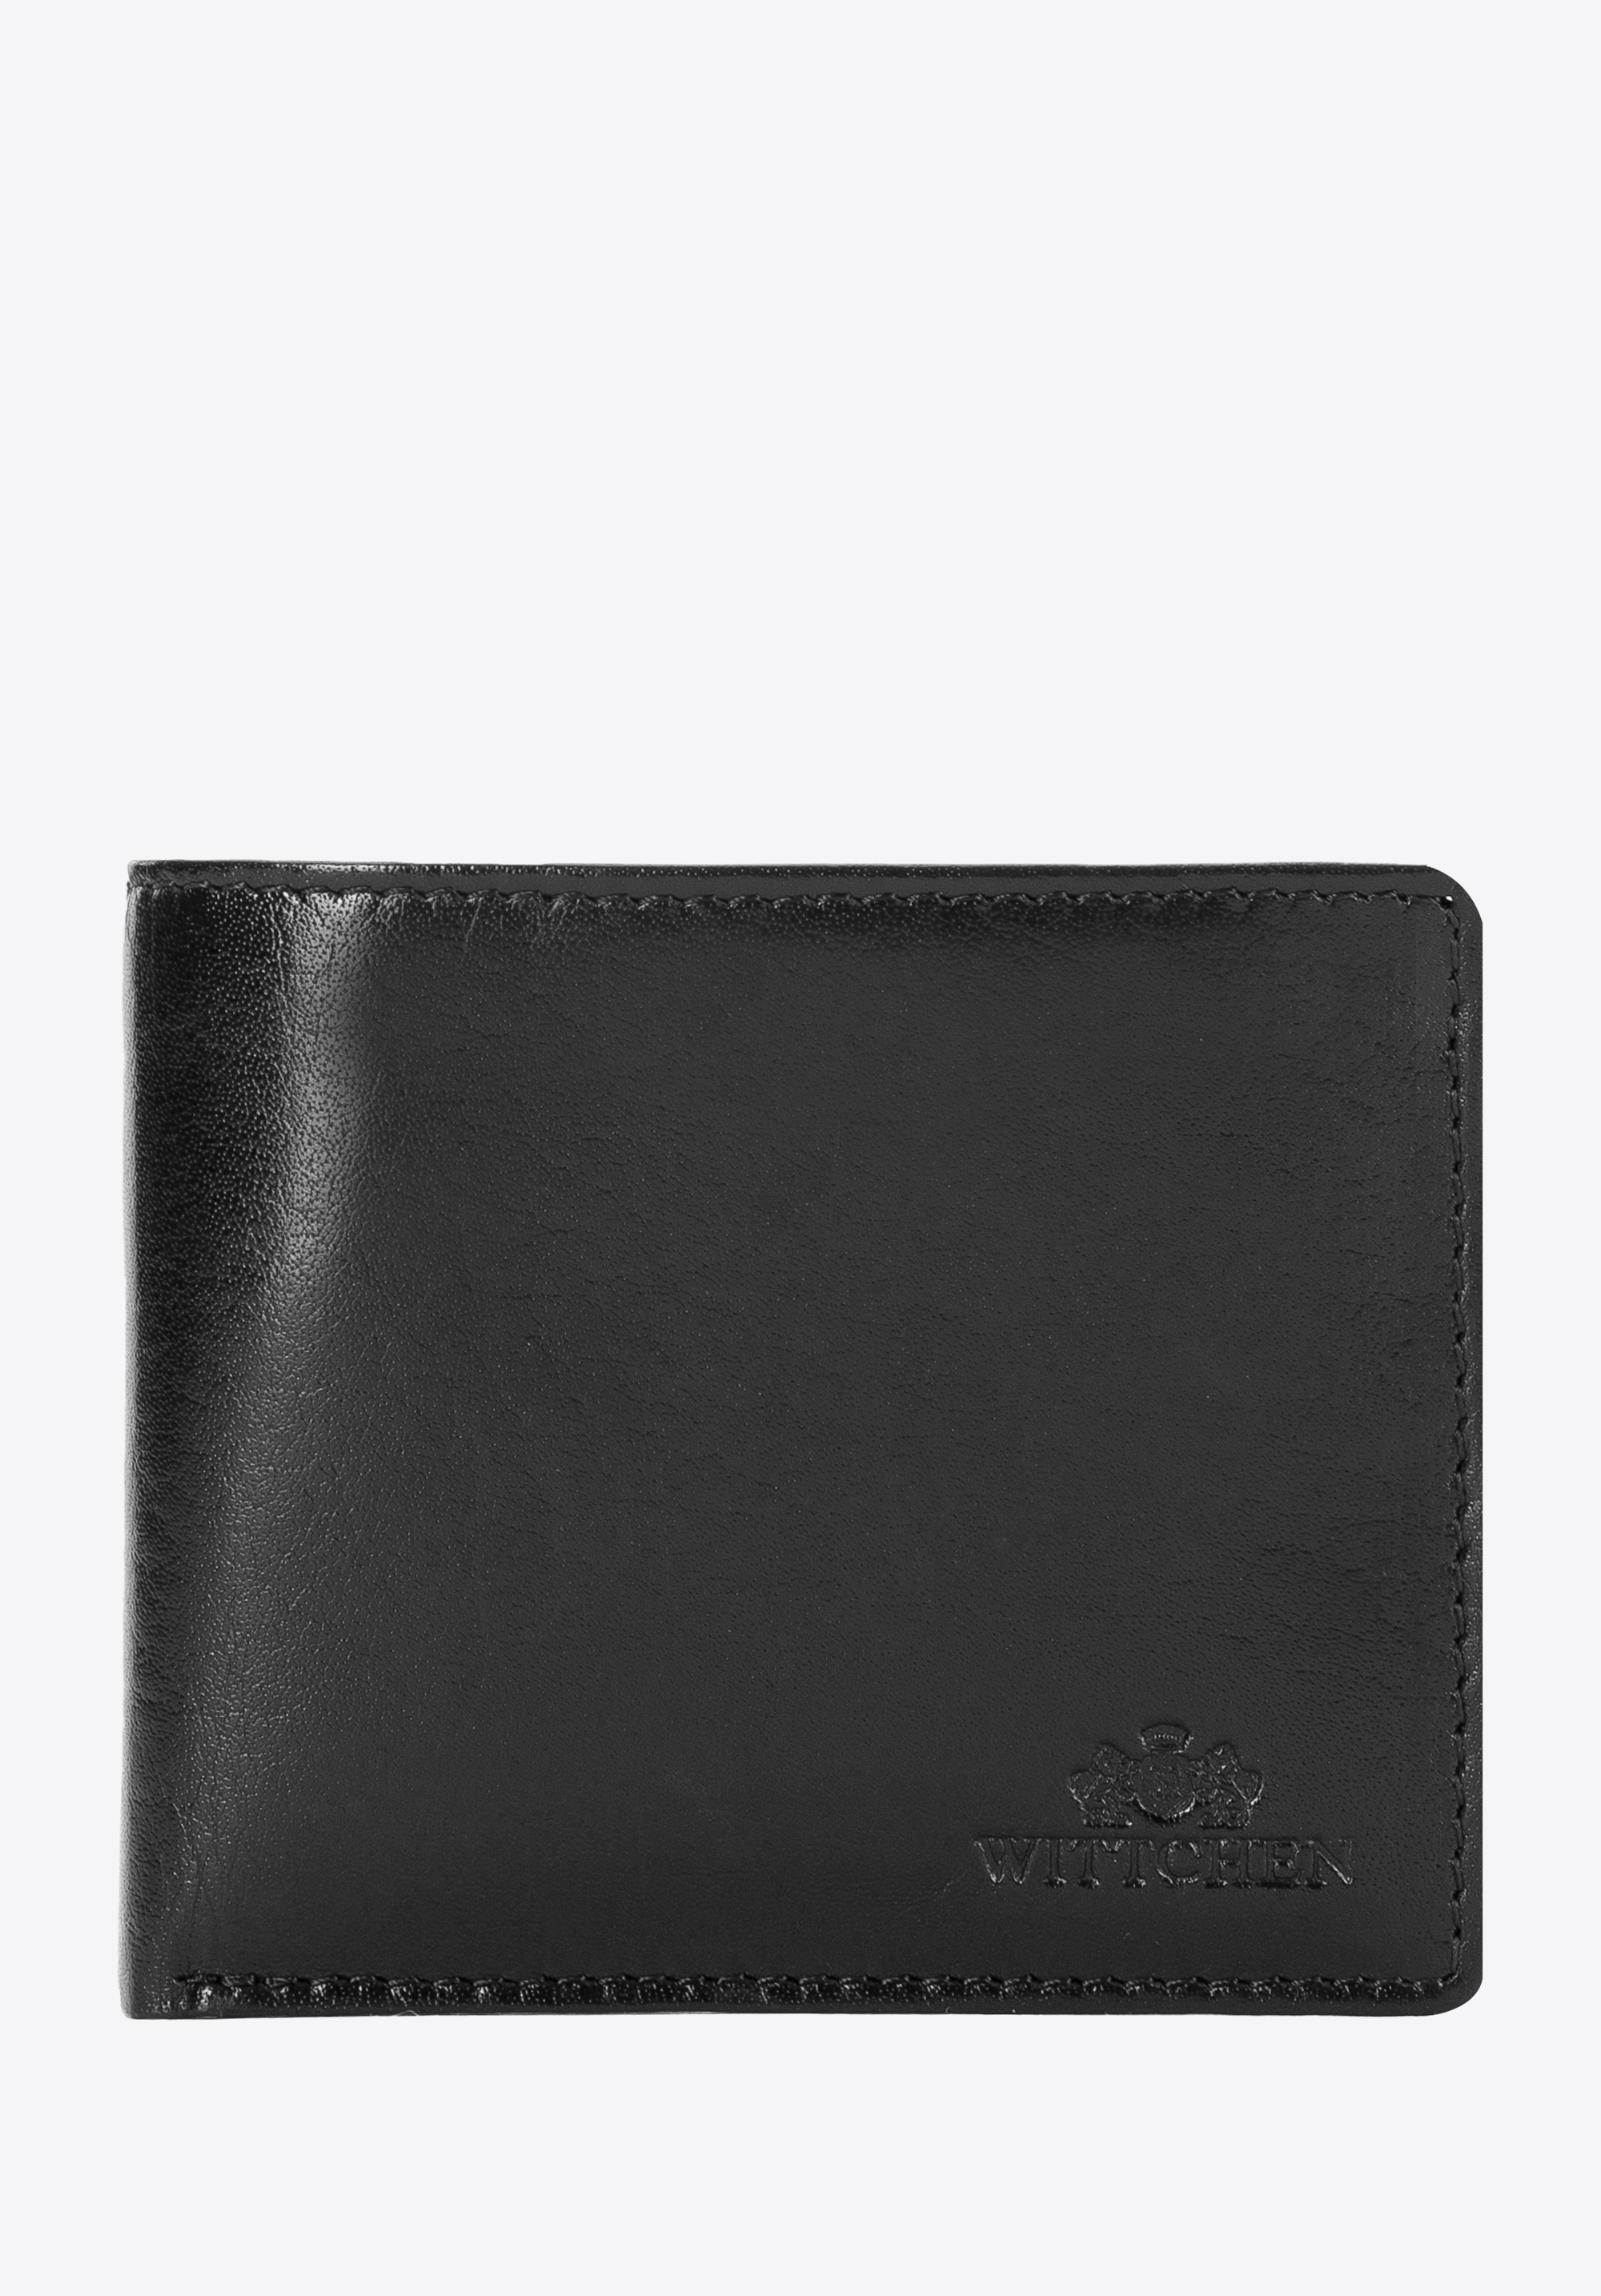 Women's small leather RFID wallet | WITTCHEN